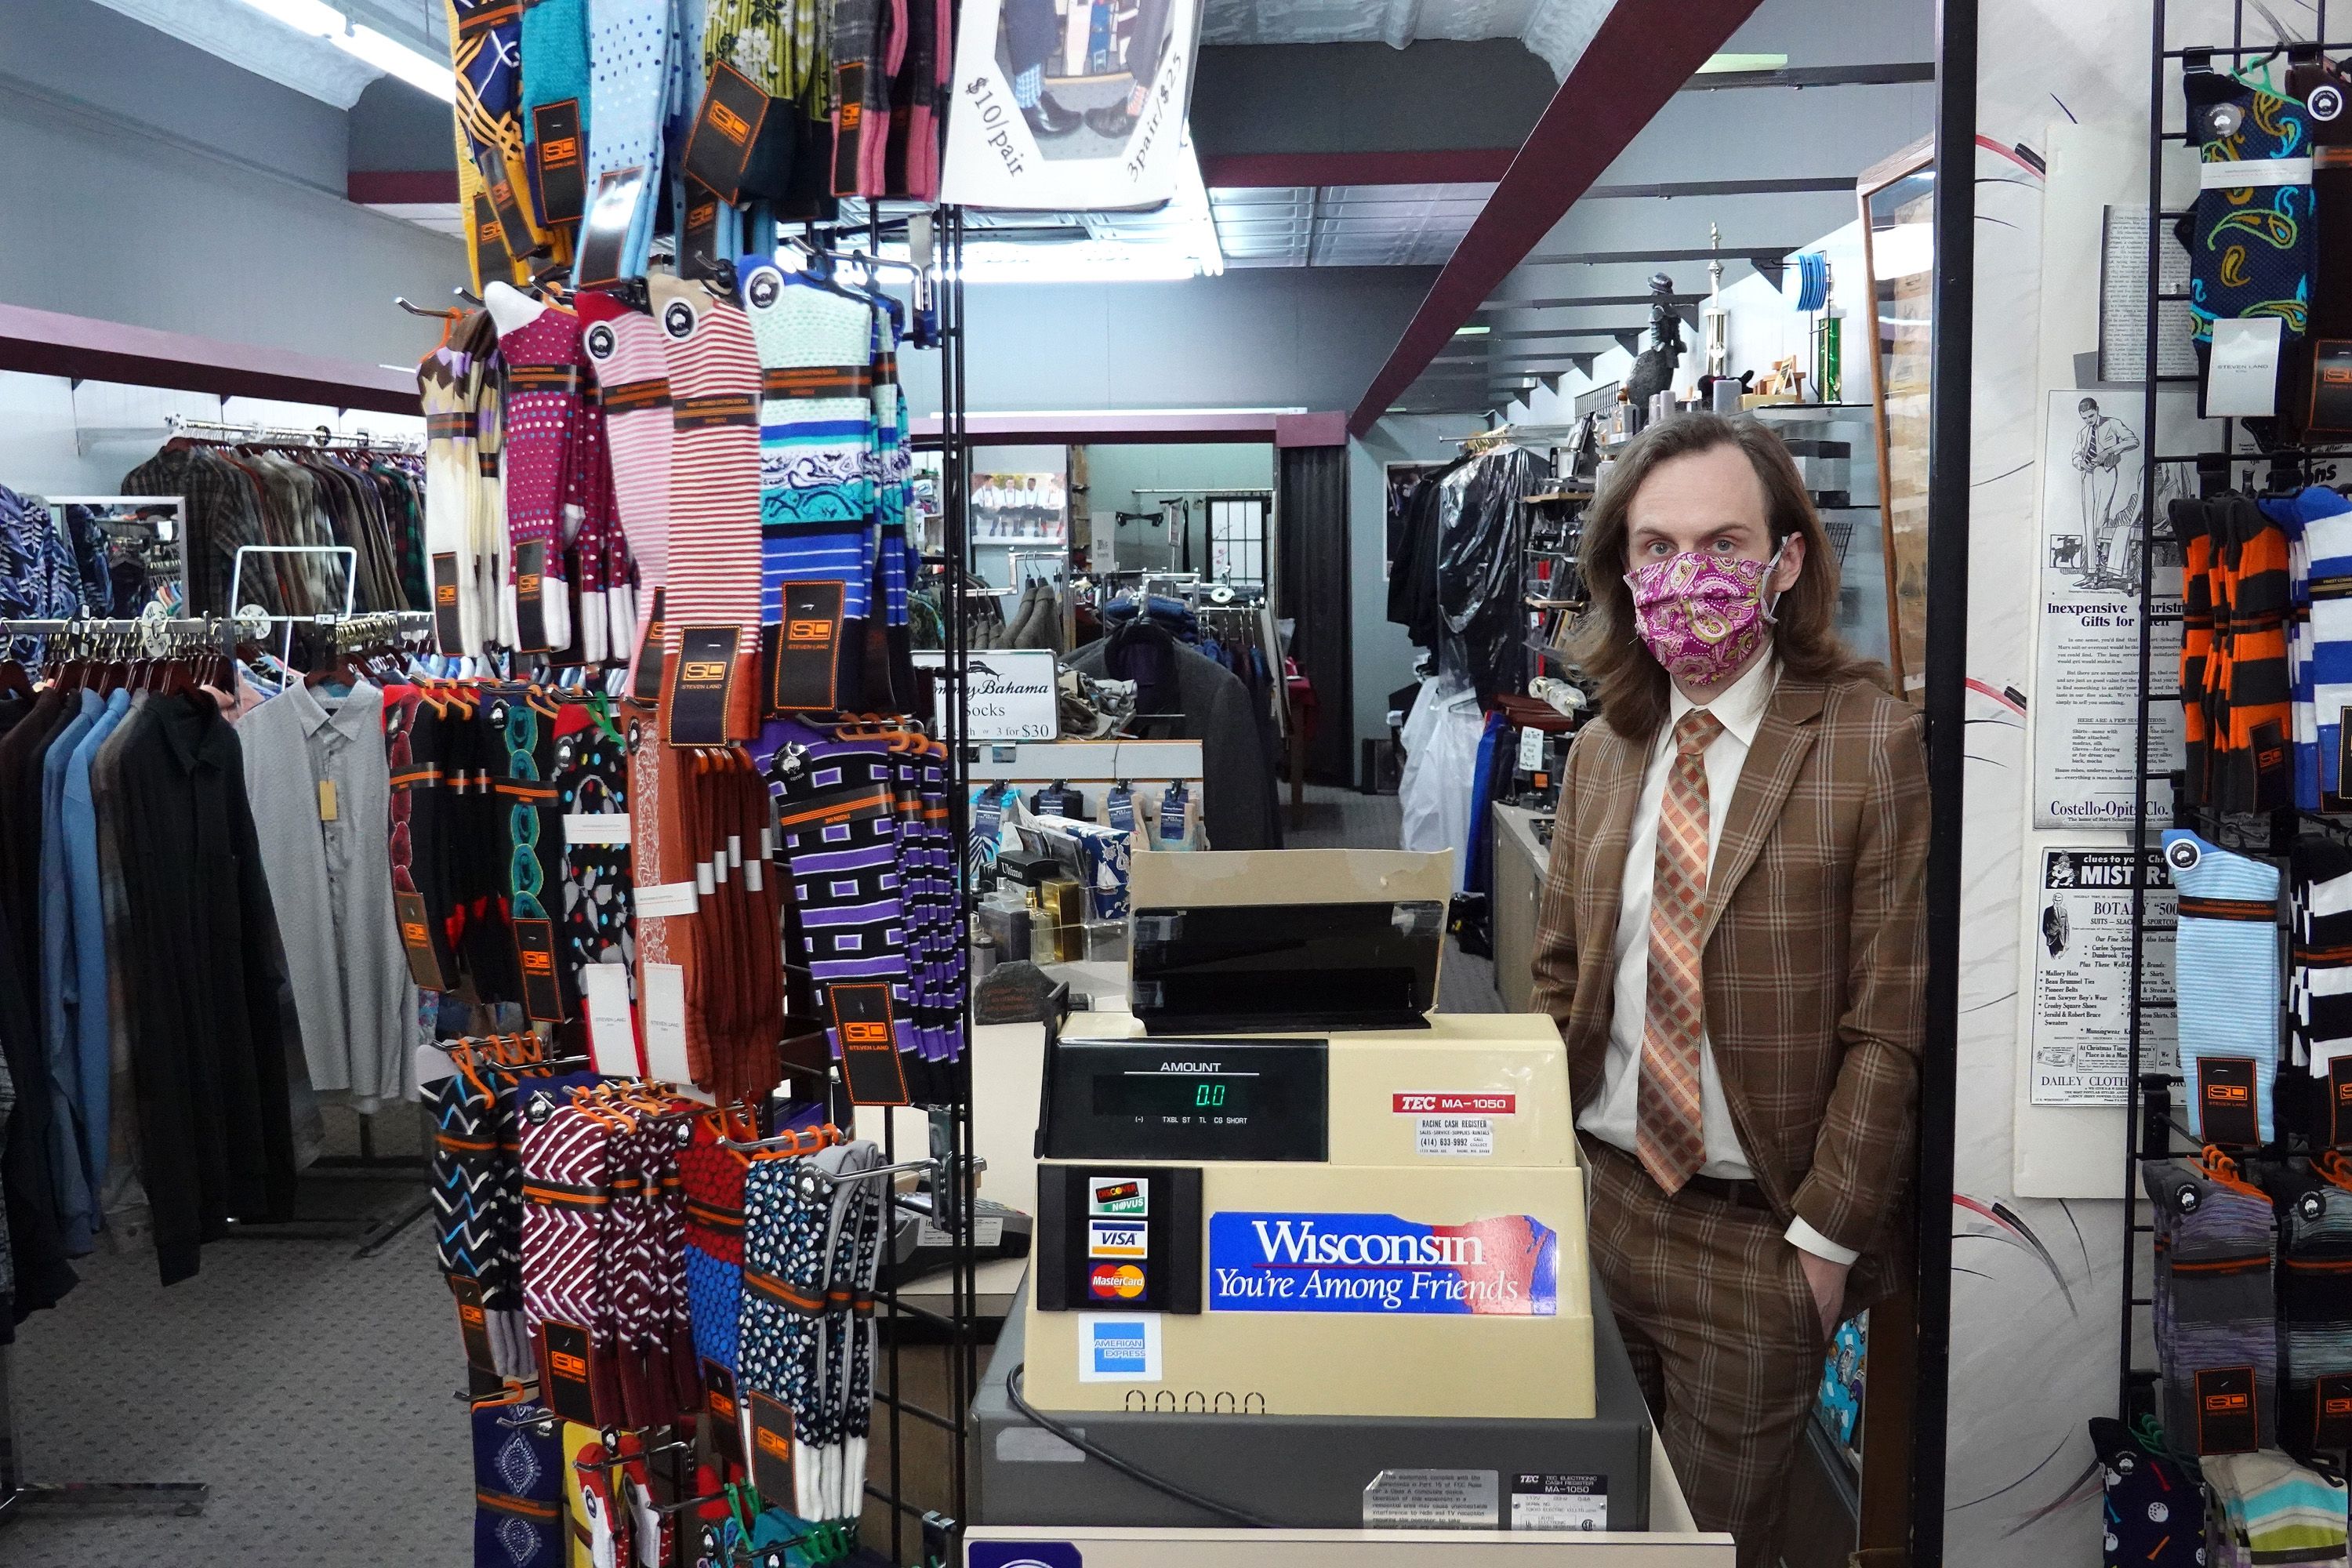 In this image, a man in a suit stands in a retail store surrounded by shirts